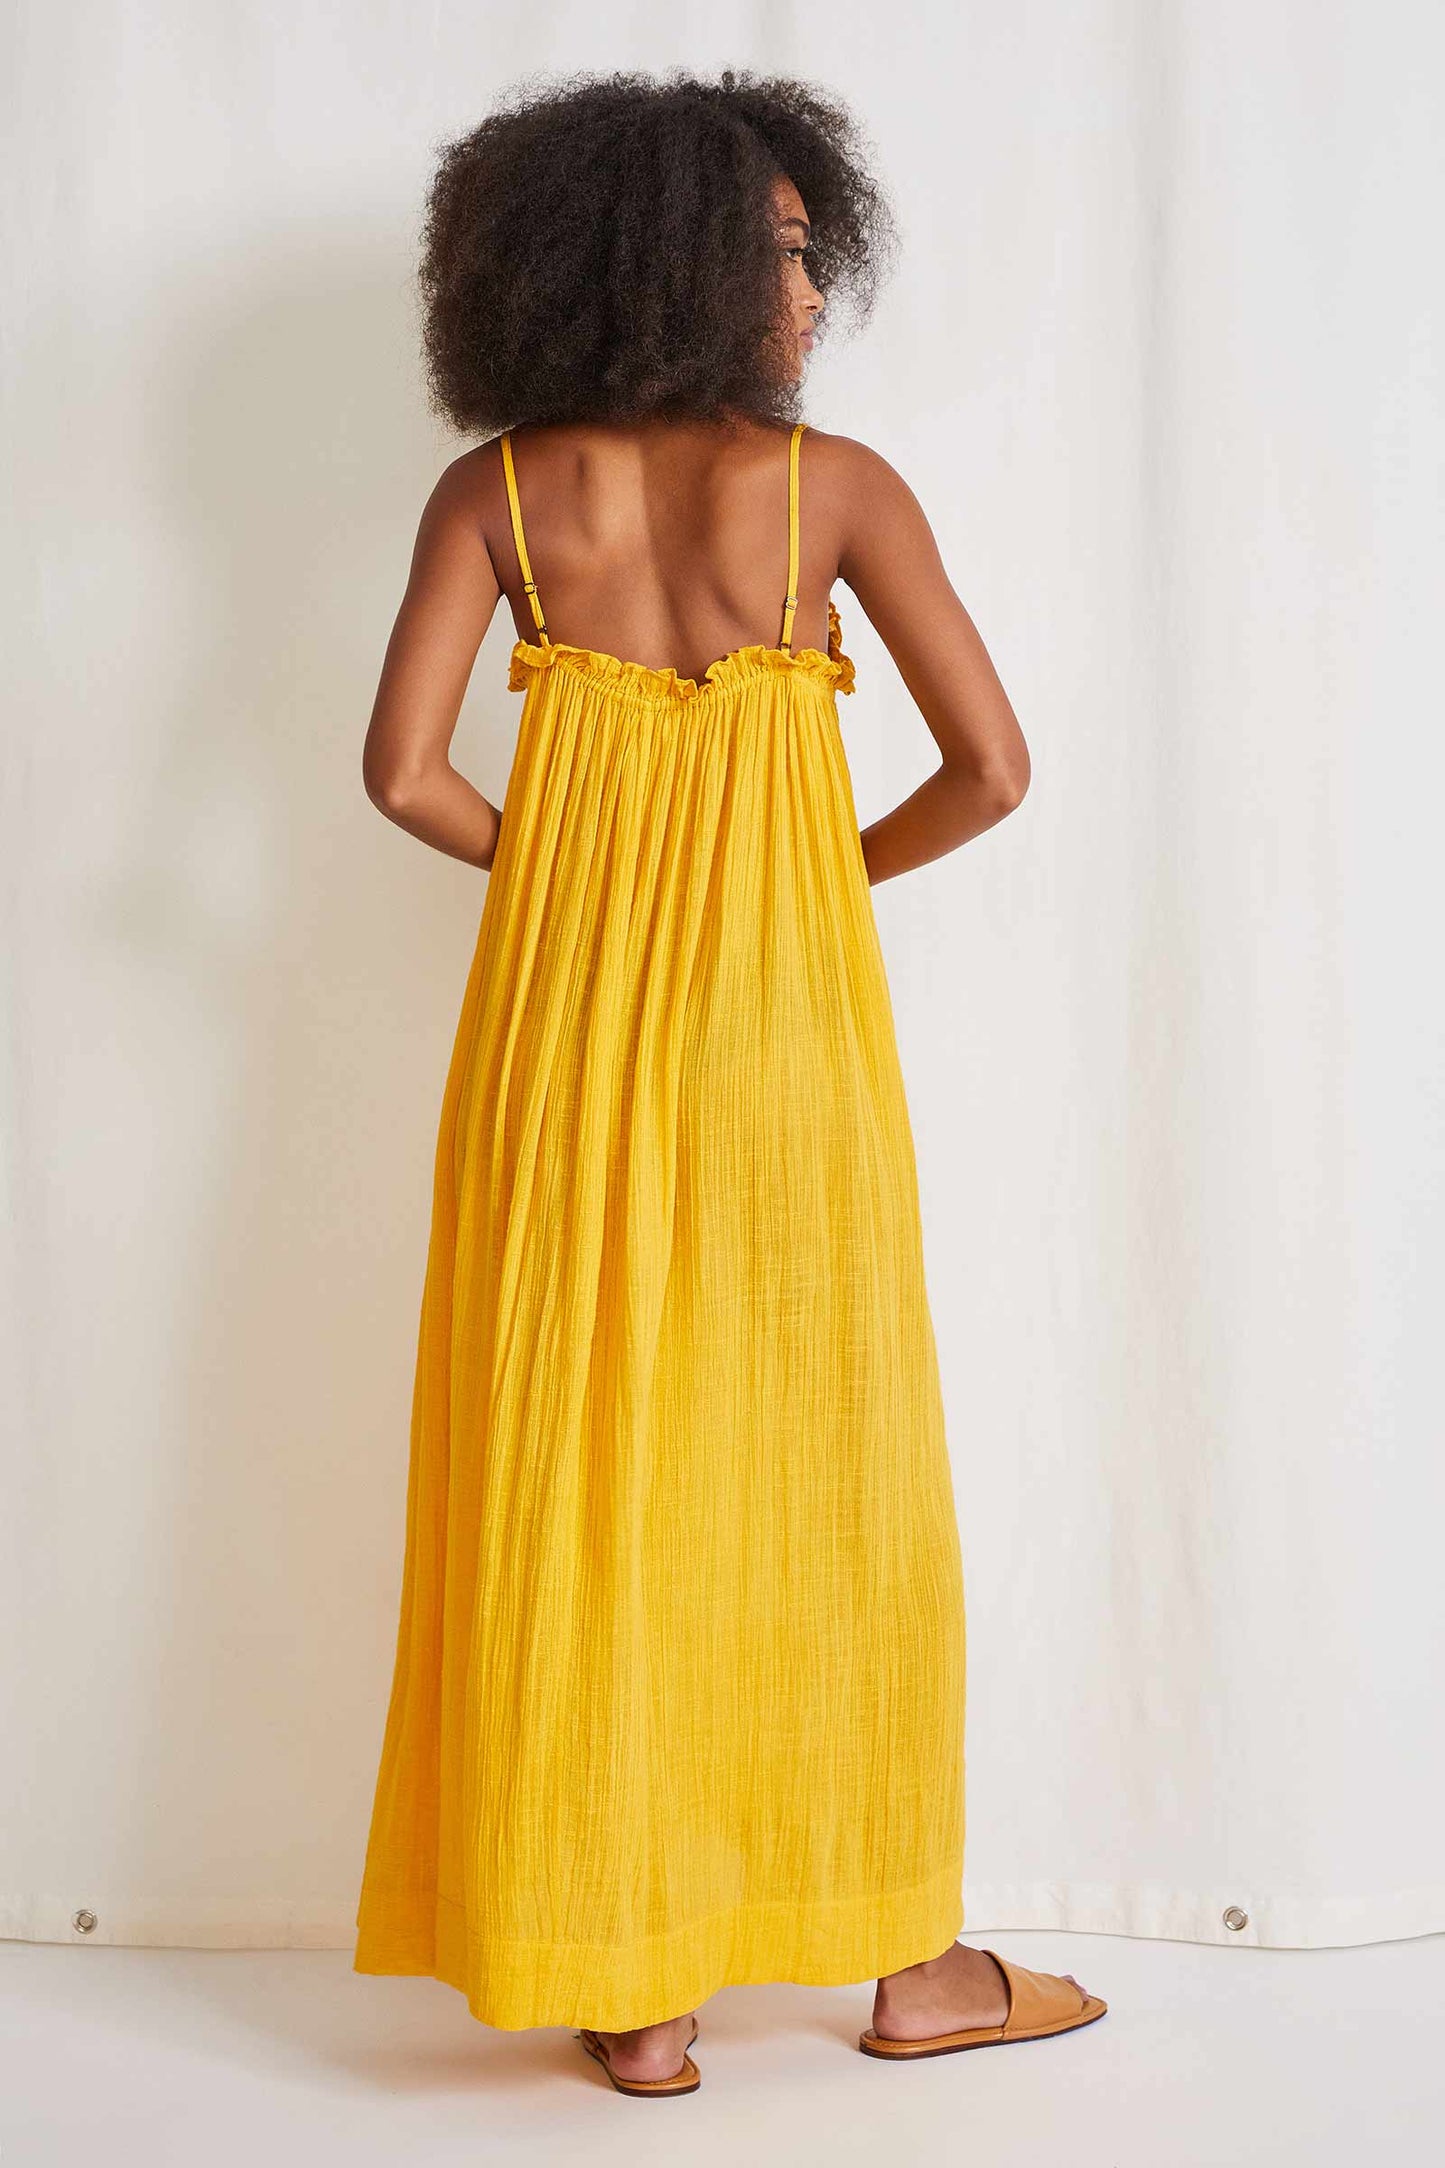 This beautiful spaghetti strap maxi dress is completes with gathered elastic around the chest and a ruffle detail. This dress is lined and made of a cotton blend. Comes in mimosa  and charcoal hues.